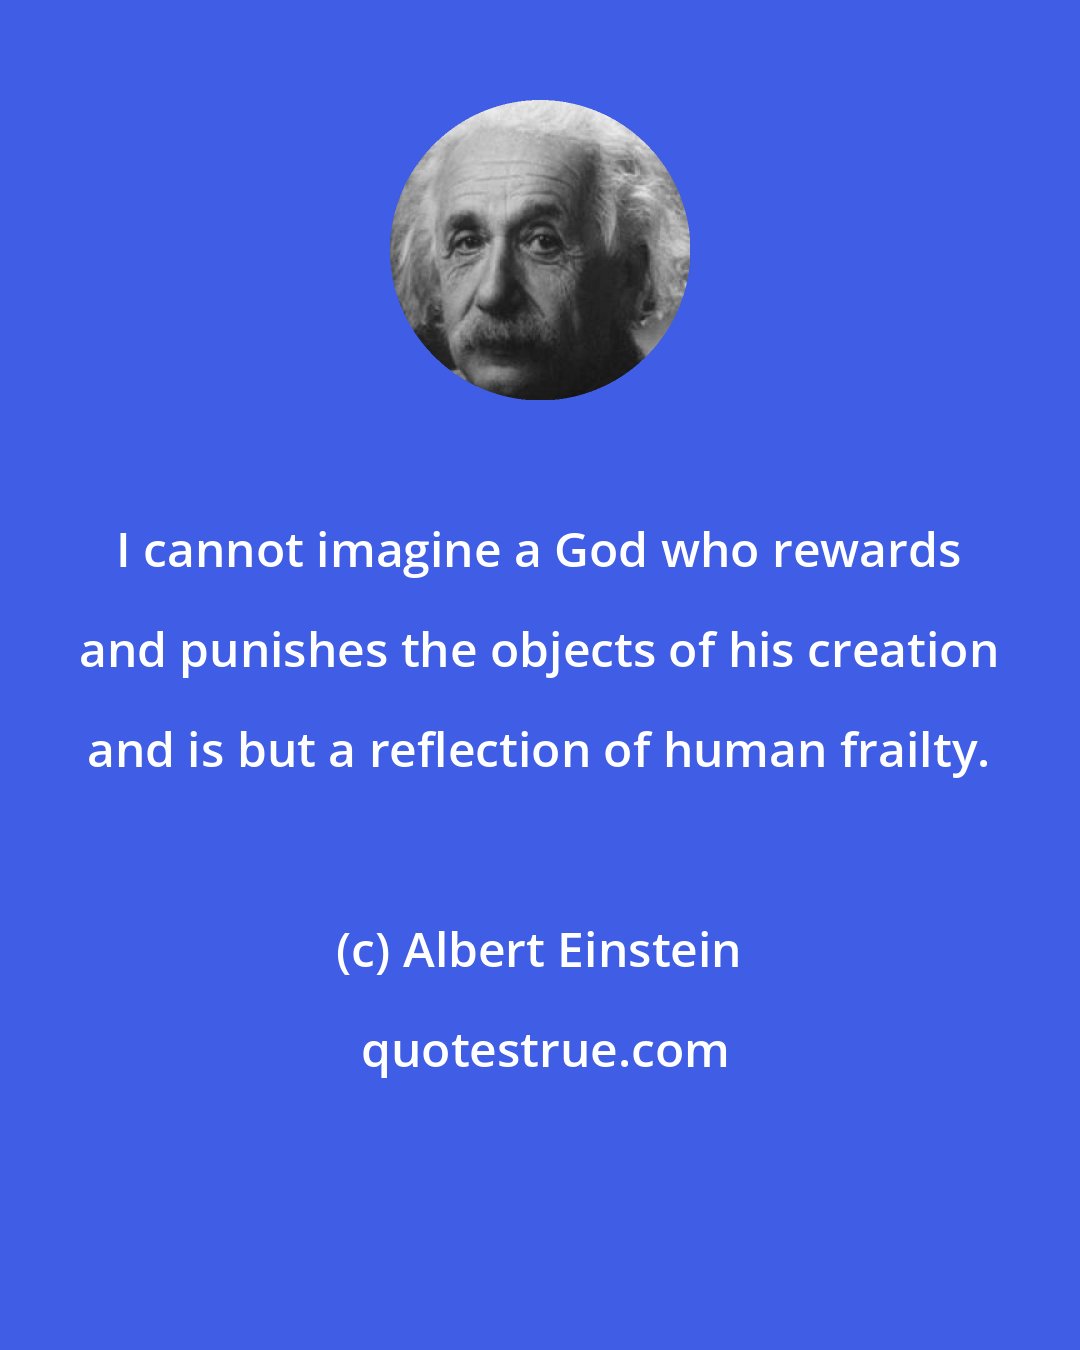 Albert Einstein: I cannot imagine a God who rewards and punishes the objects of his creation and is but a reflection of human frailty.